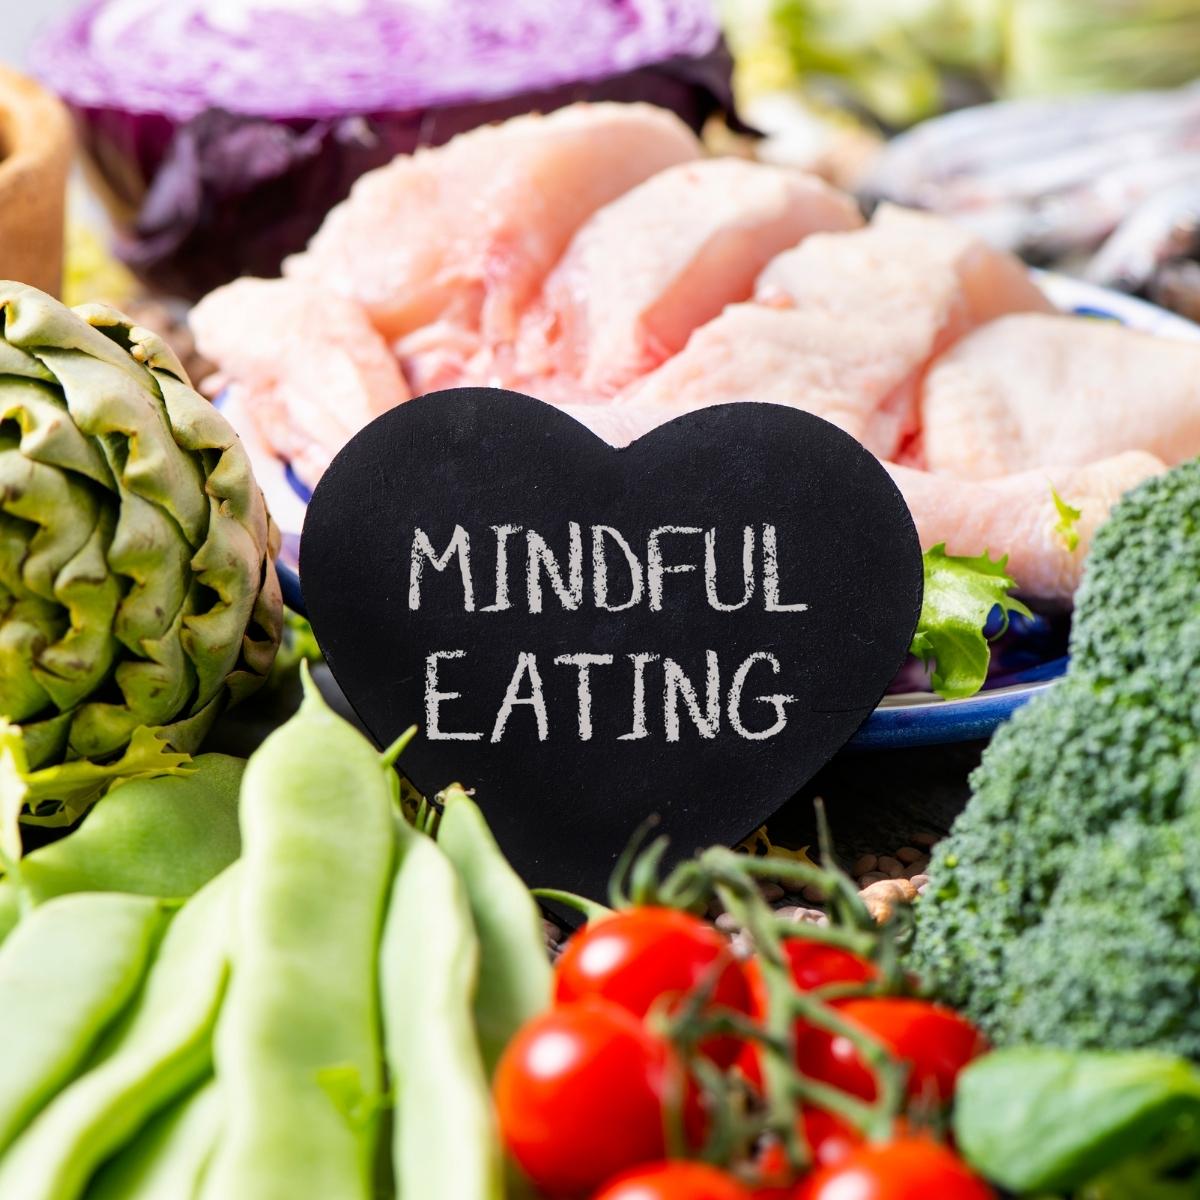 Try Mindful Eating